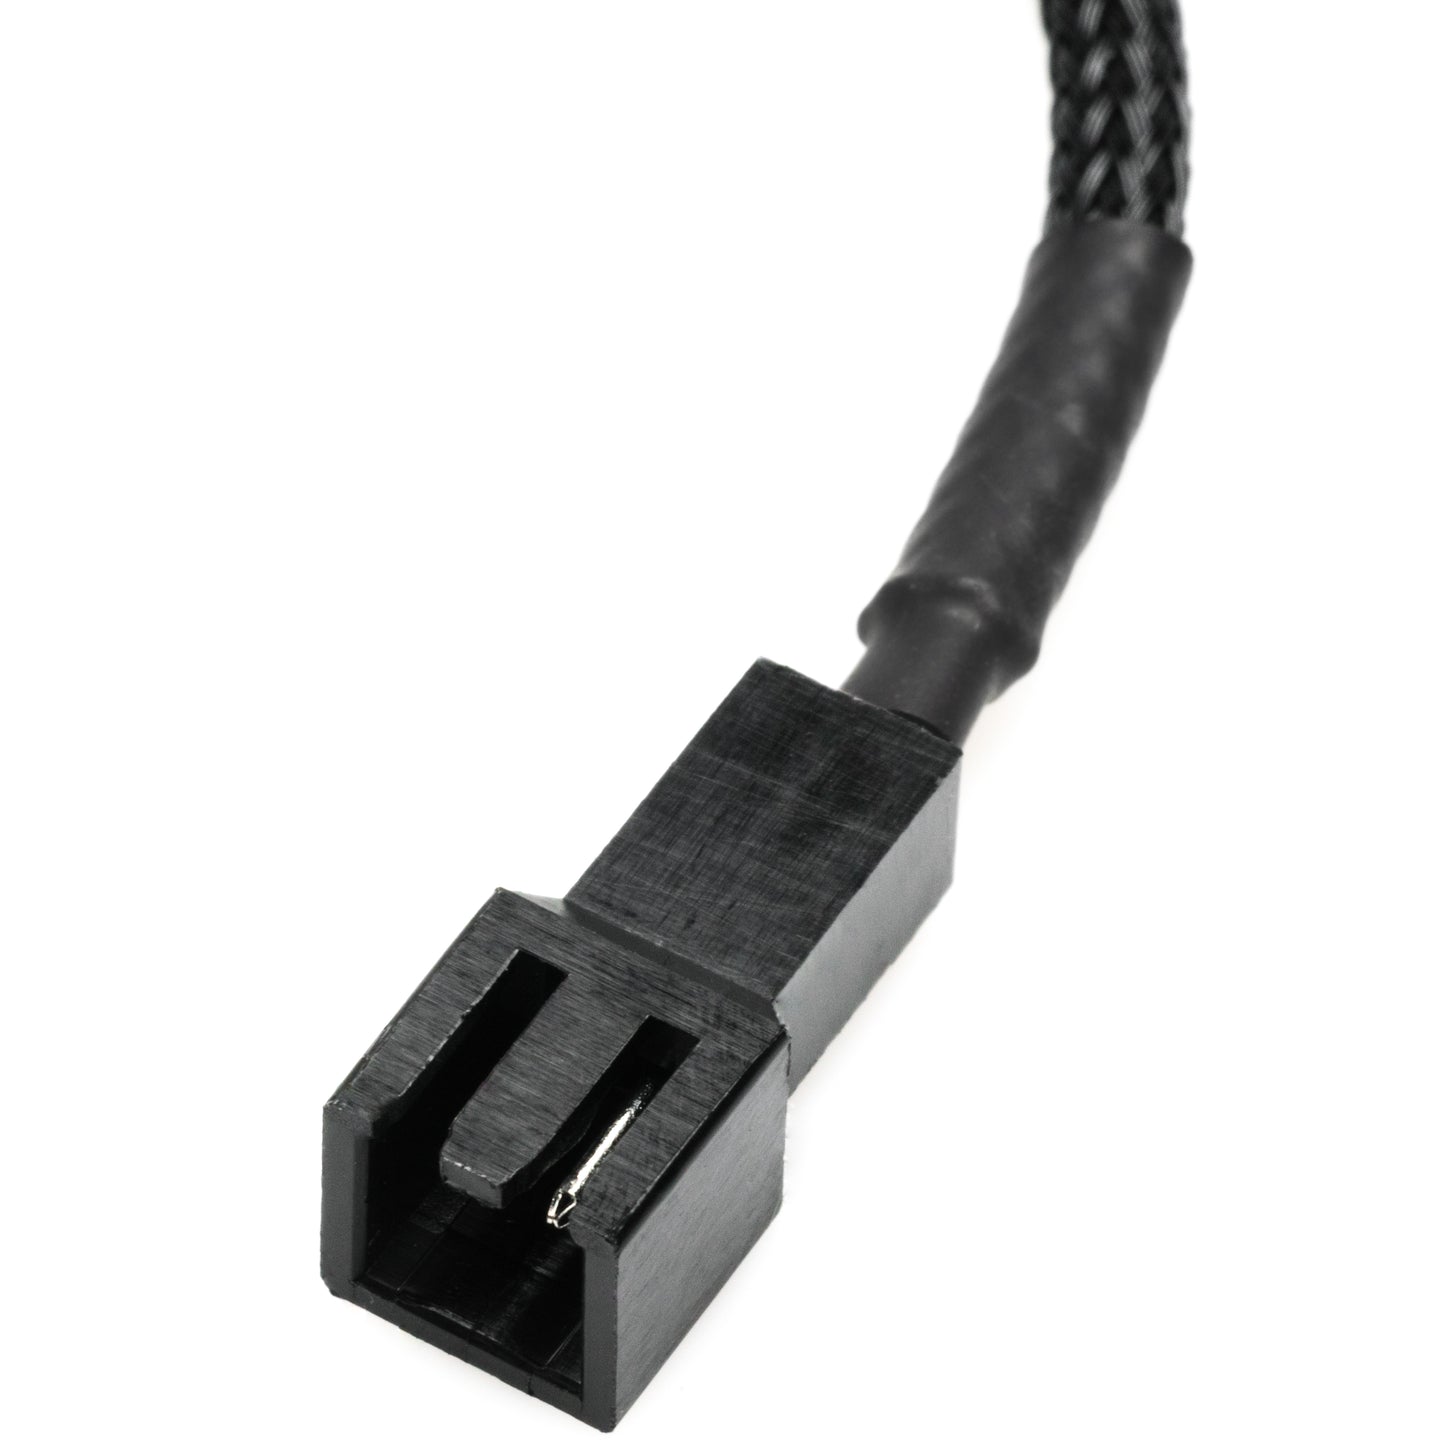 2-Pin Male PC Fan Adapter Cables 2-Pack